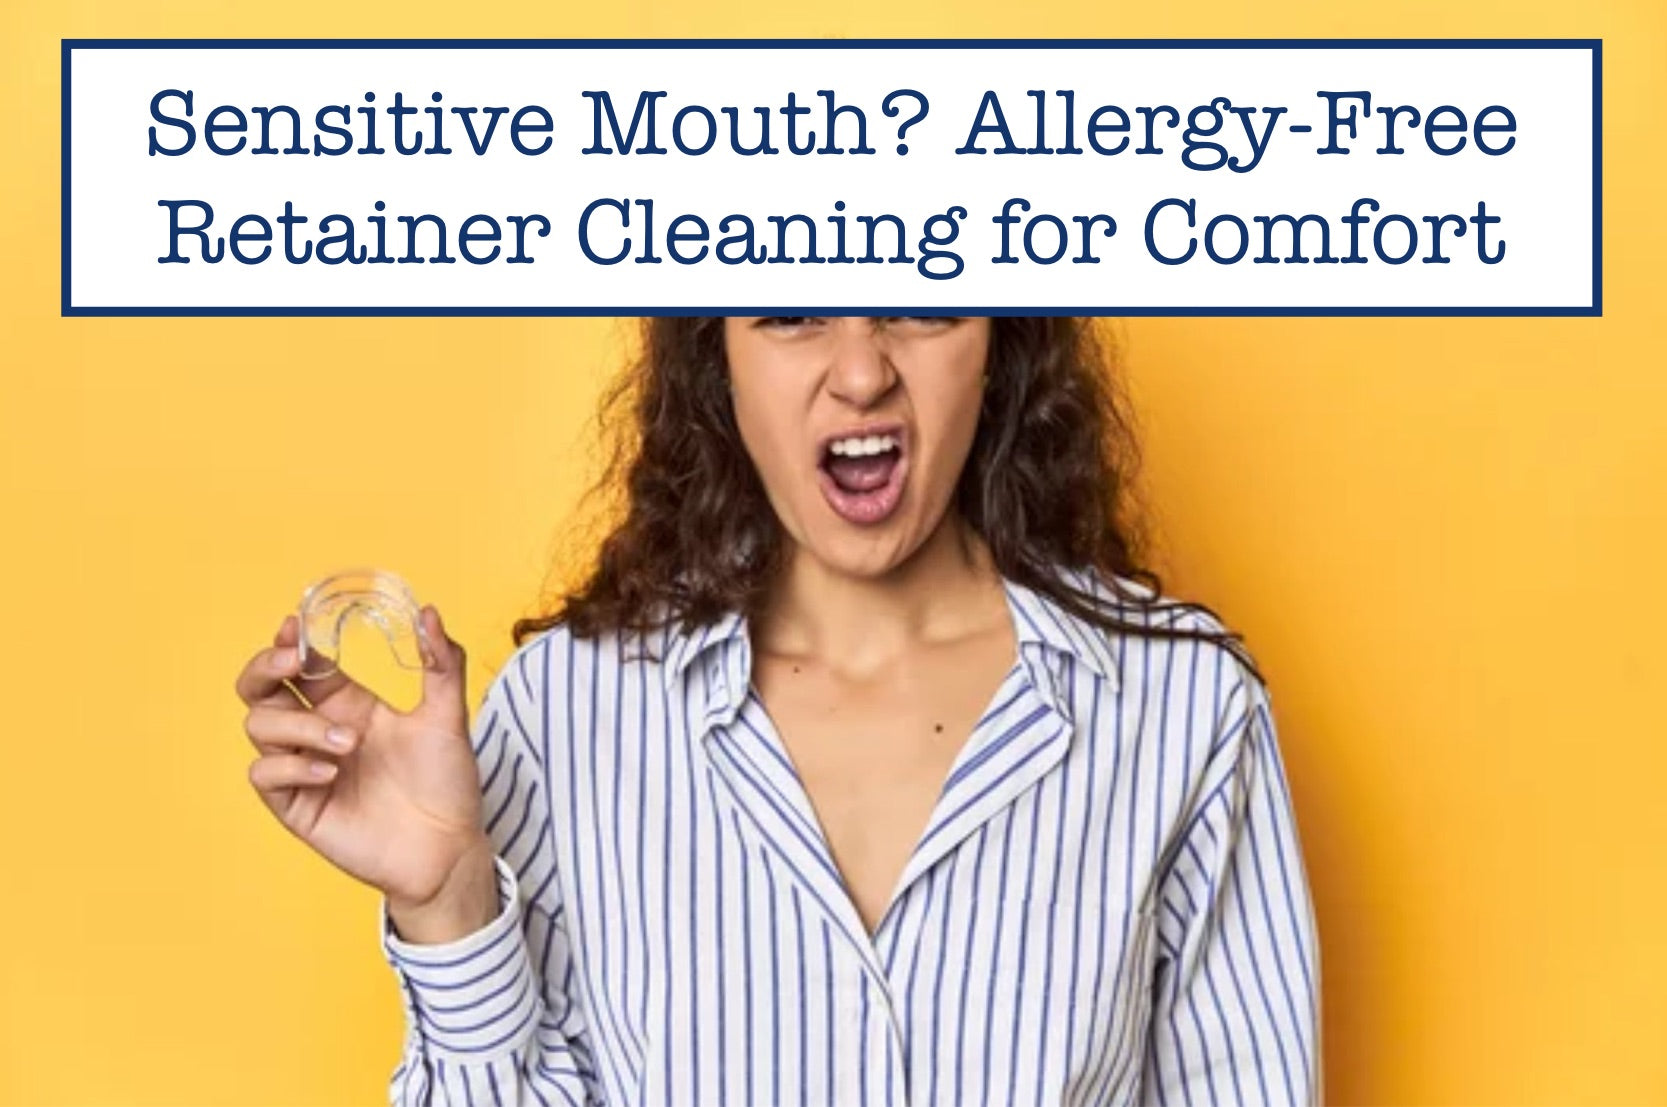 Sensitive Mouth? Allergy-Free Retainer Cleaning for Comfort